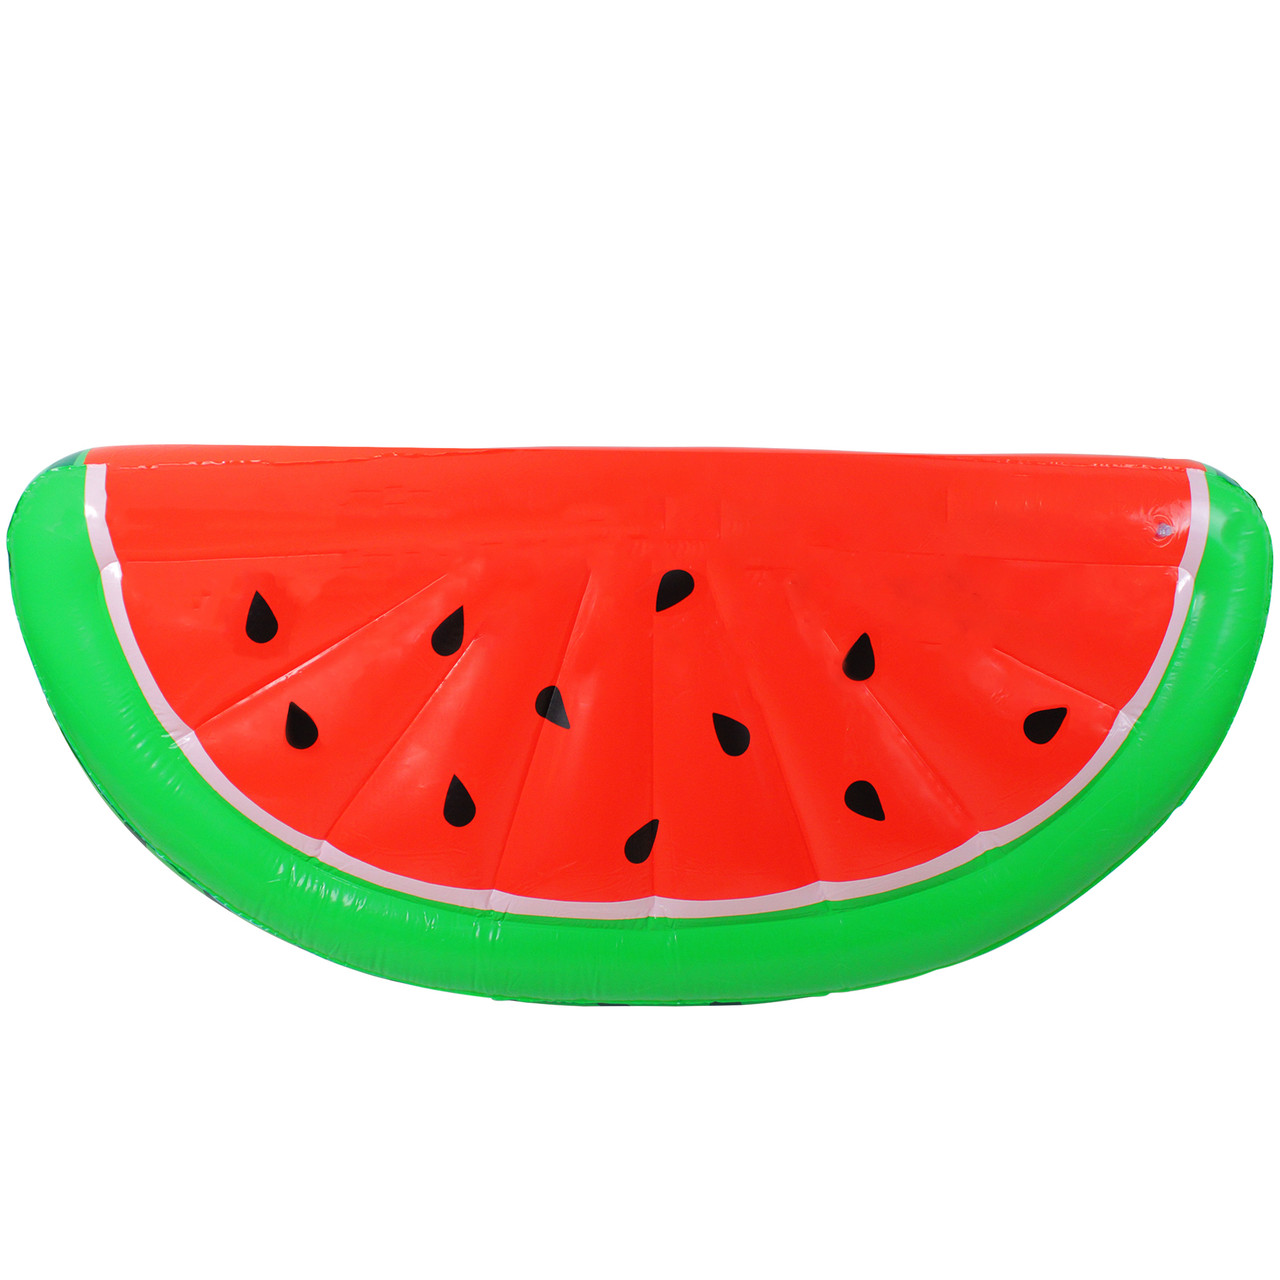 Inflatable Jumbo Watermelon Slice Lounge Pool Float - 5.75' - Red and Green